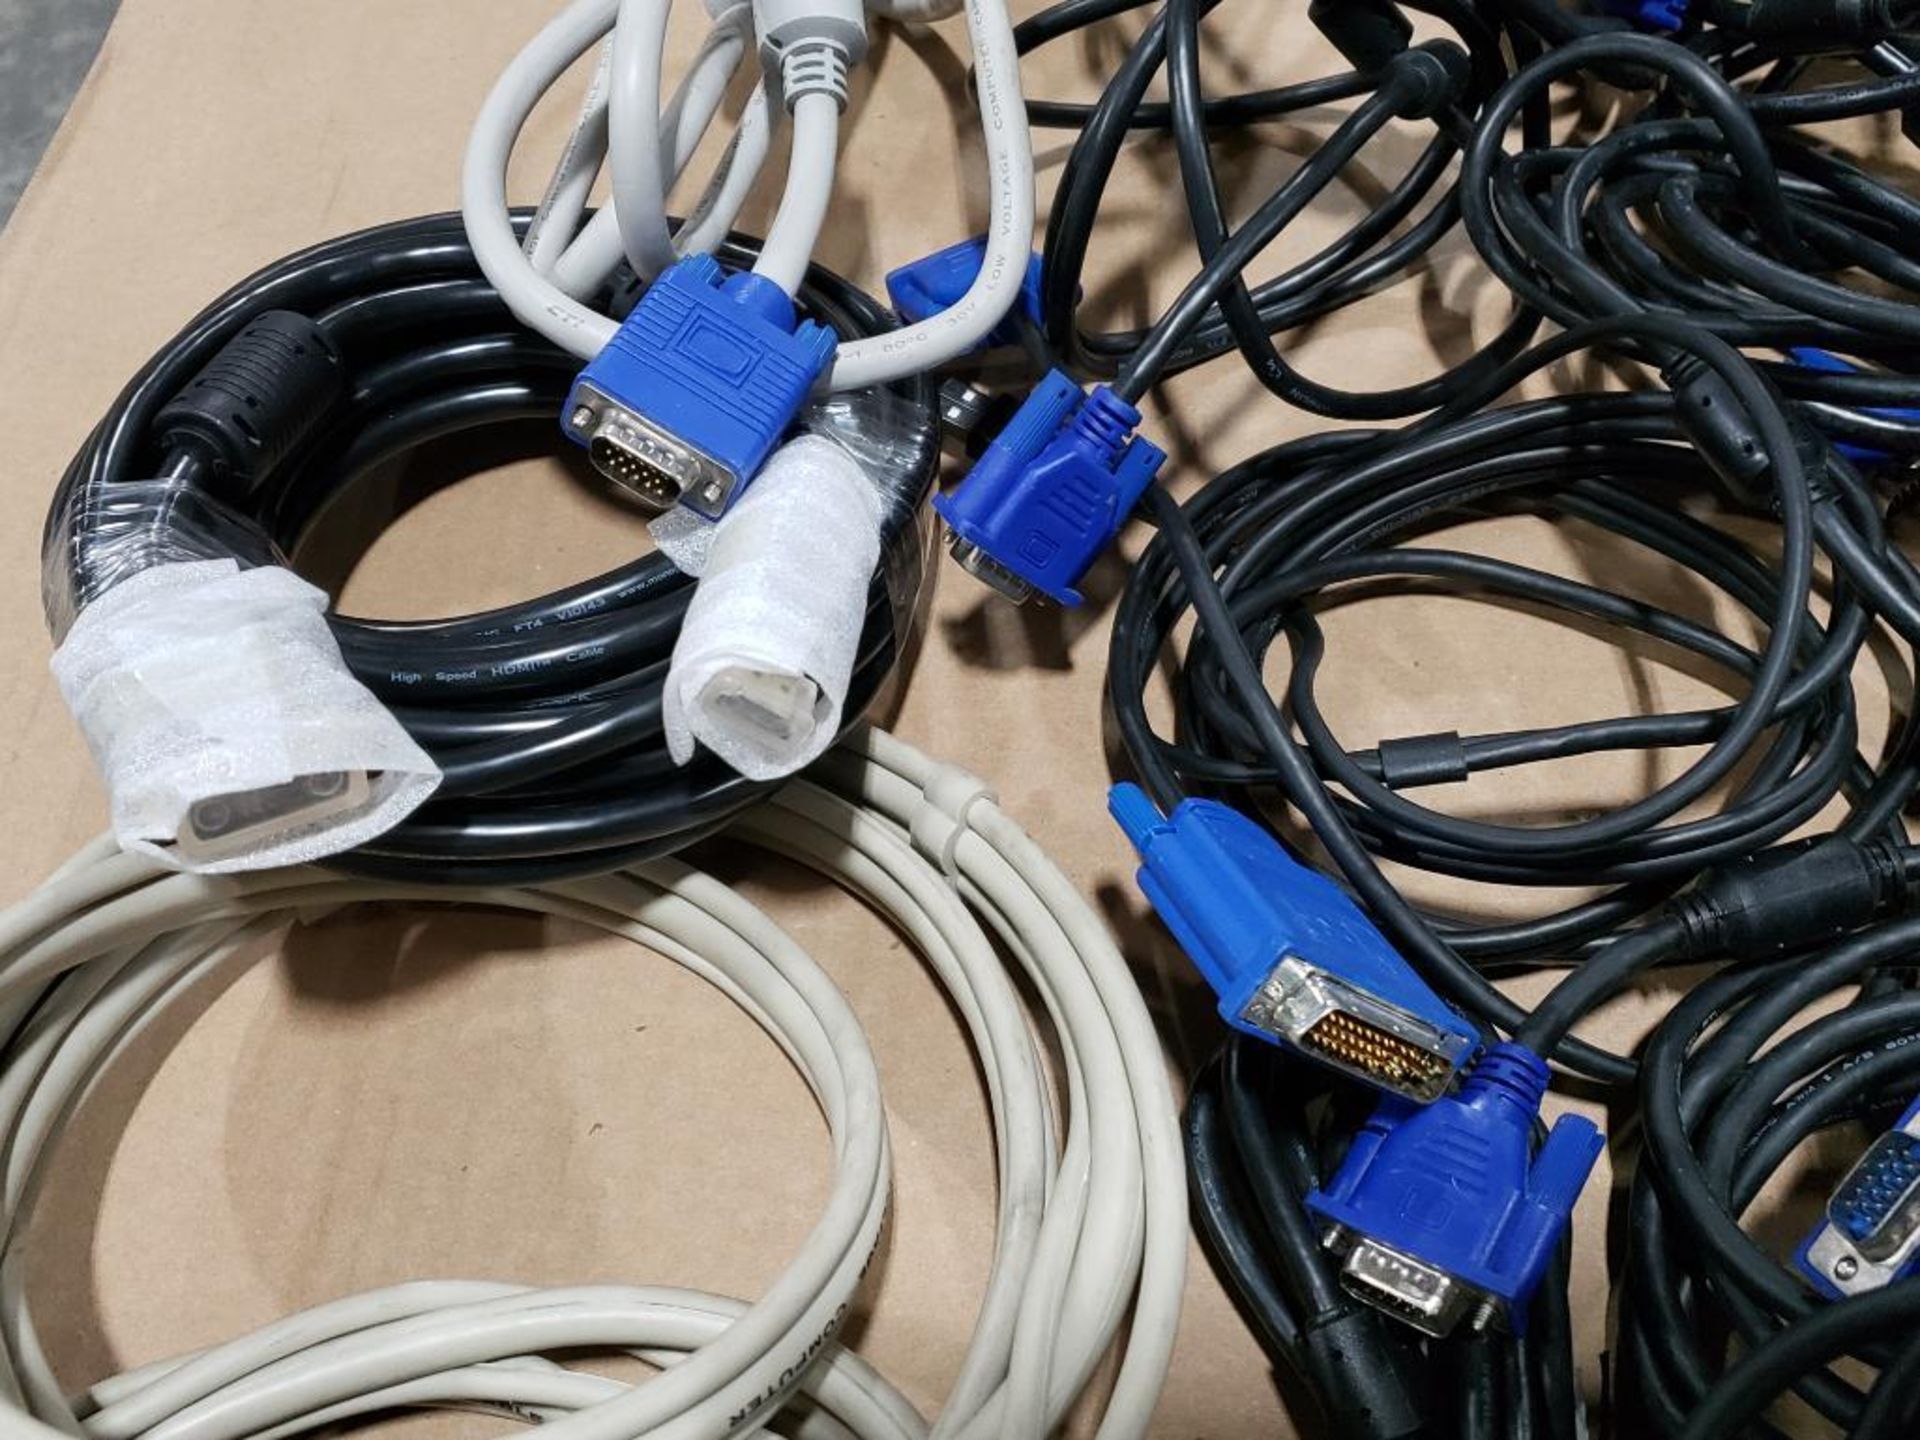 Large assortment of monitor cords. - Image 4 of 10